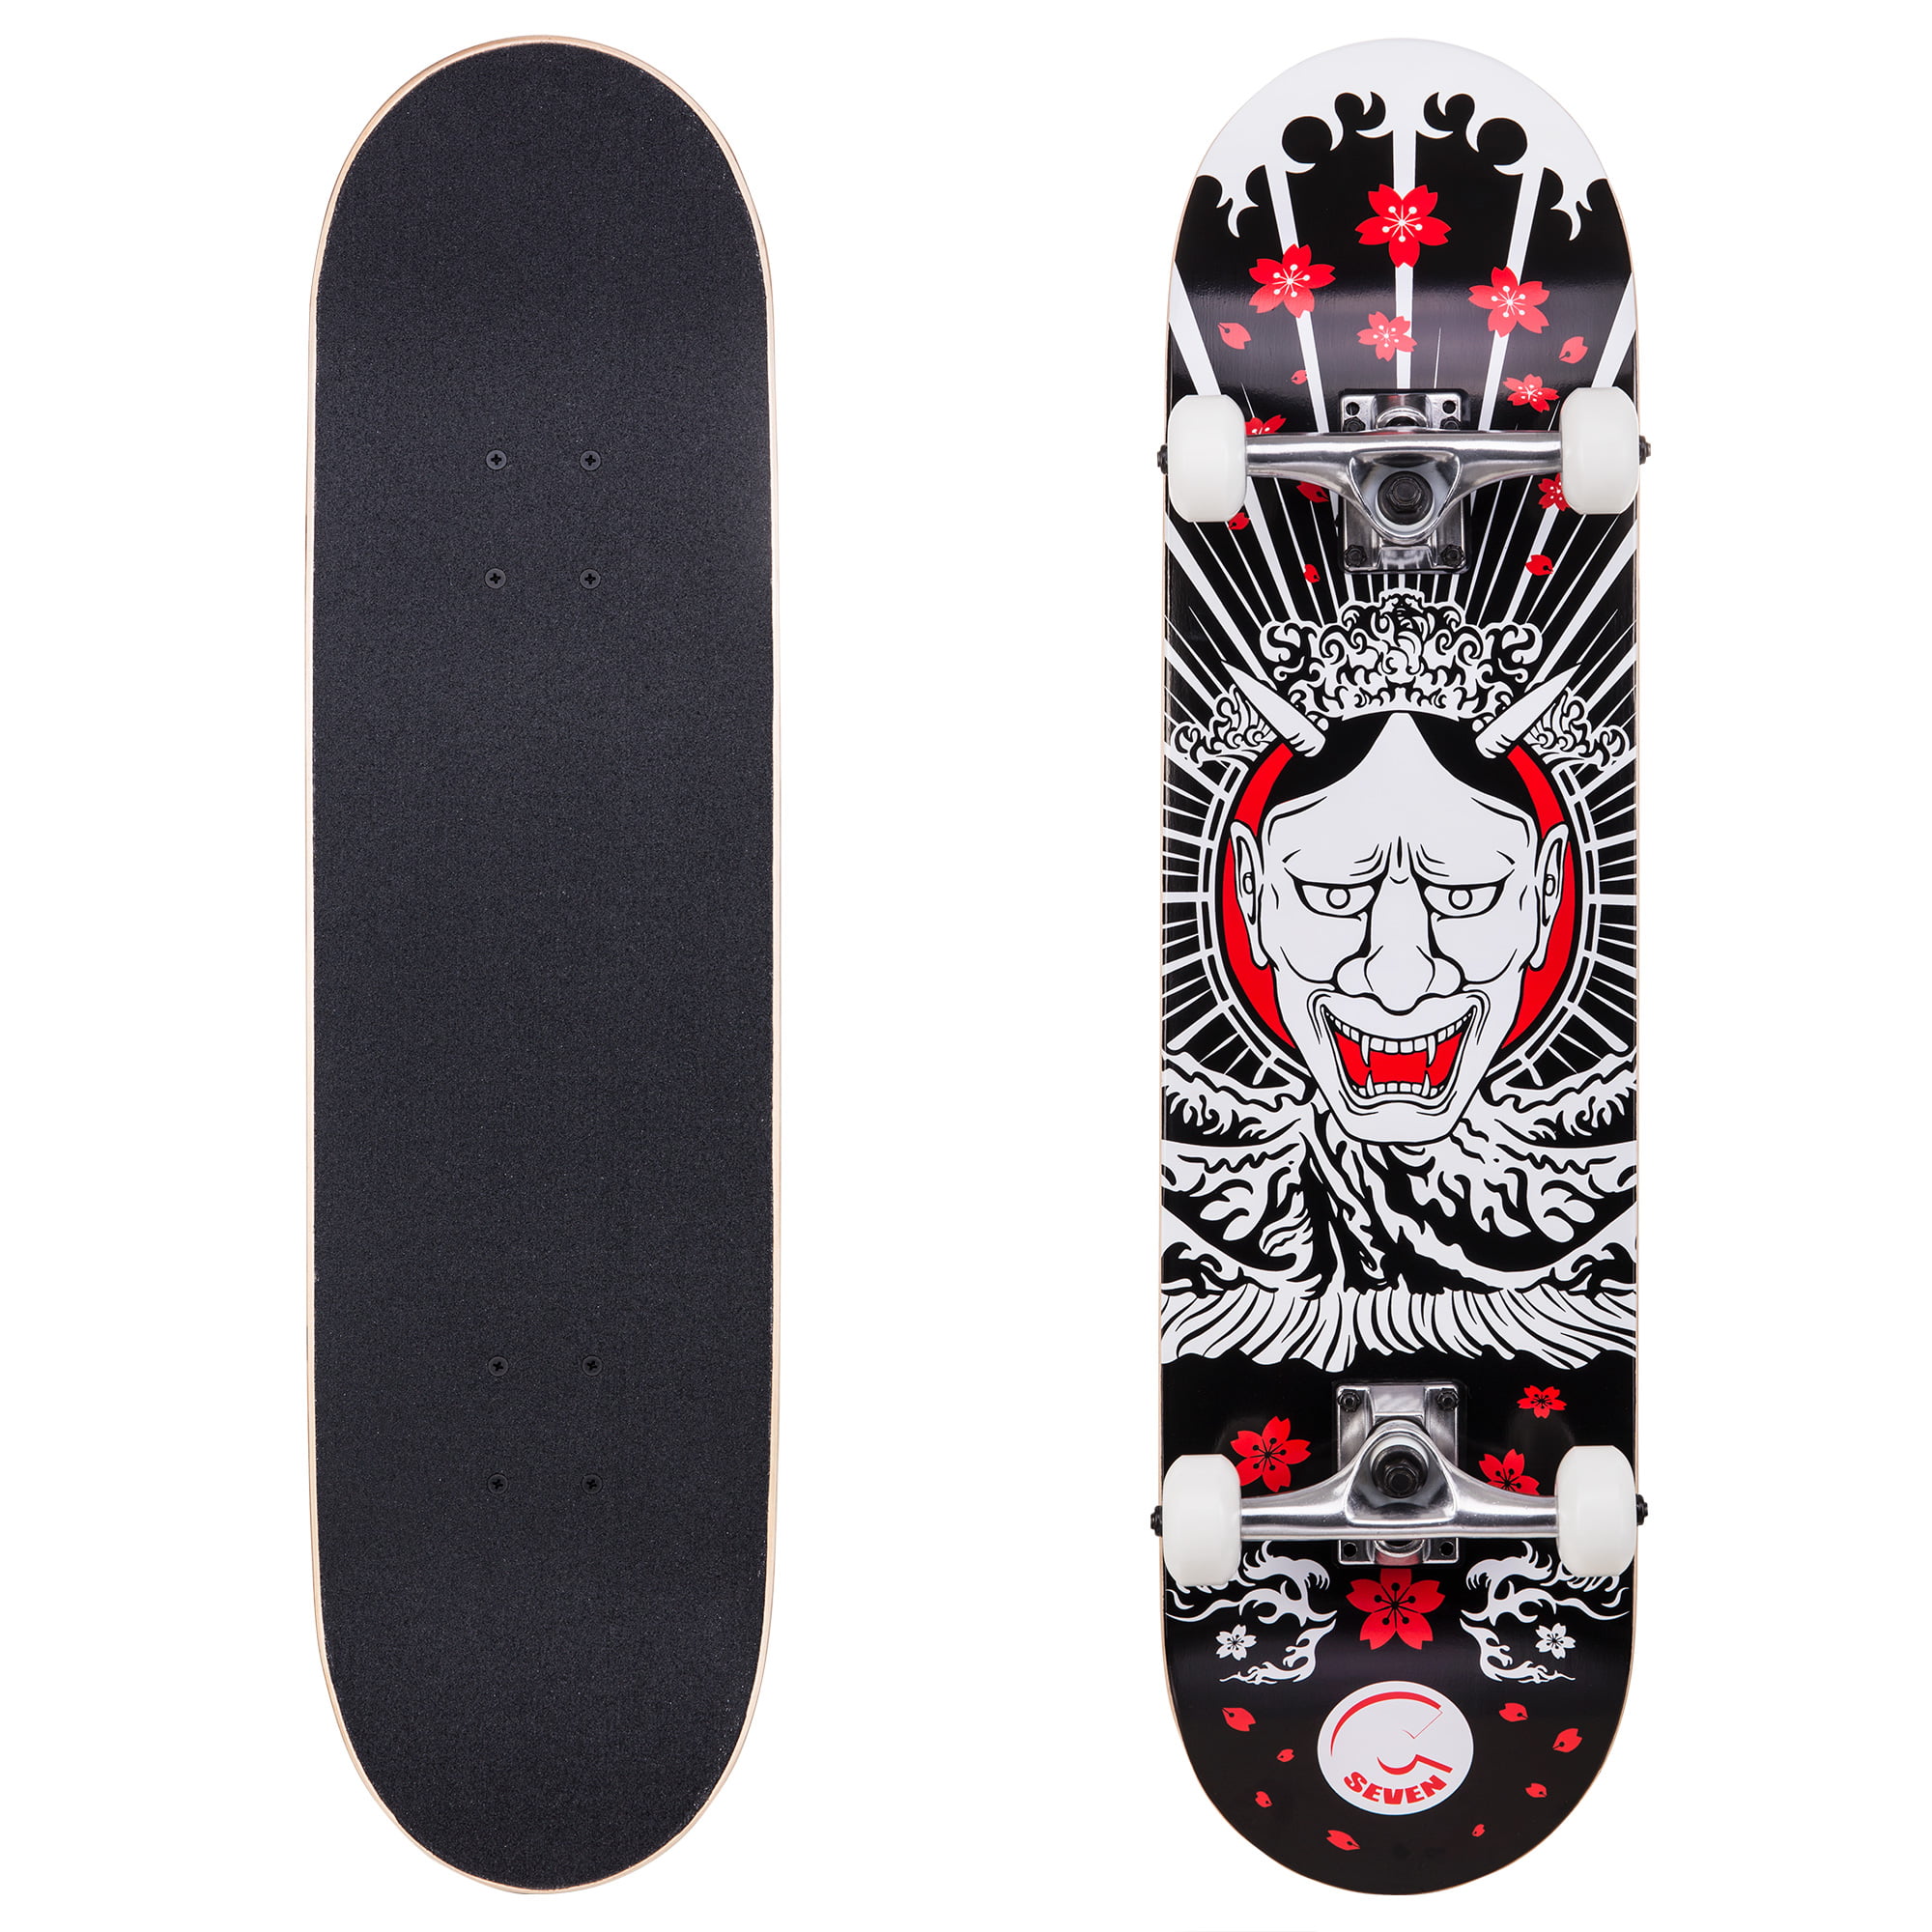 Gifts for Skateboarders Cal 7 Red Tundra Complete Popsicle Skateboard,8 Inch 